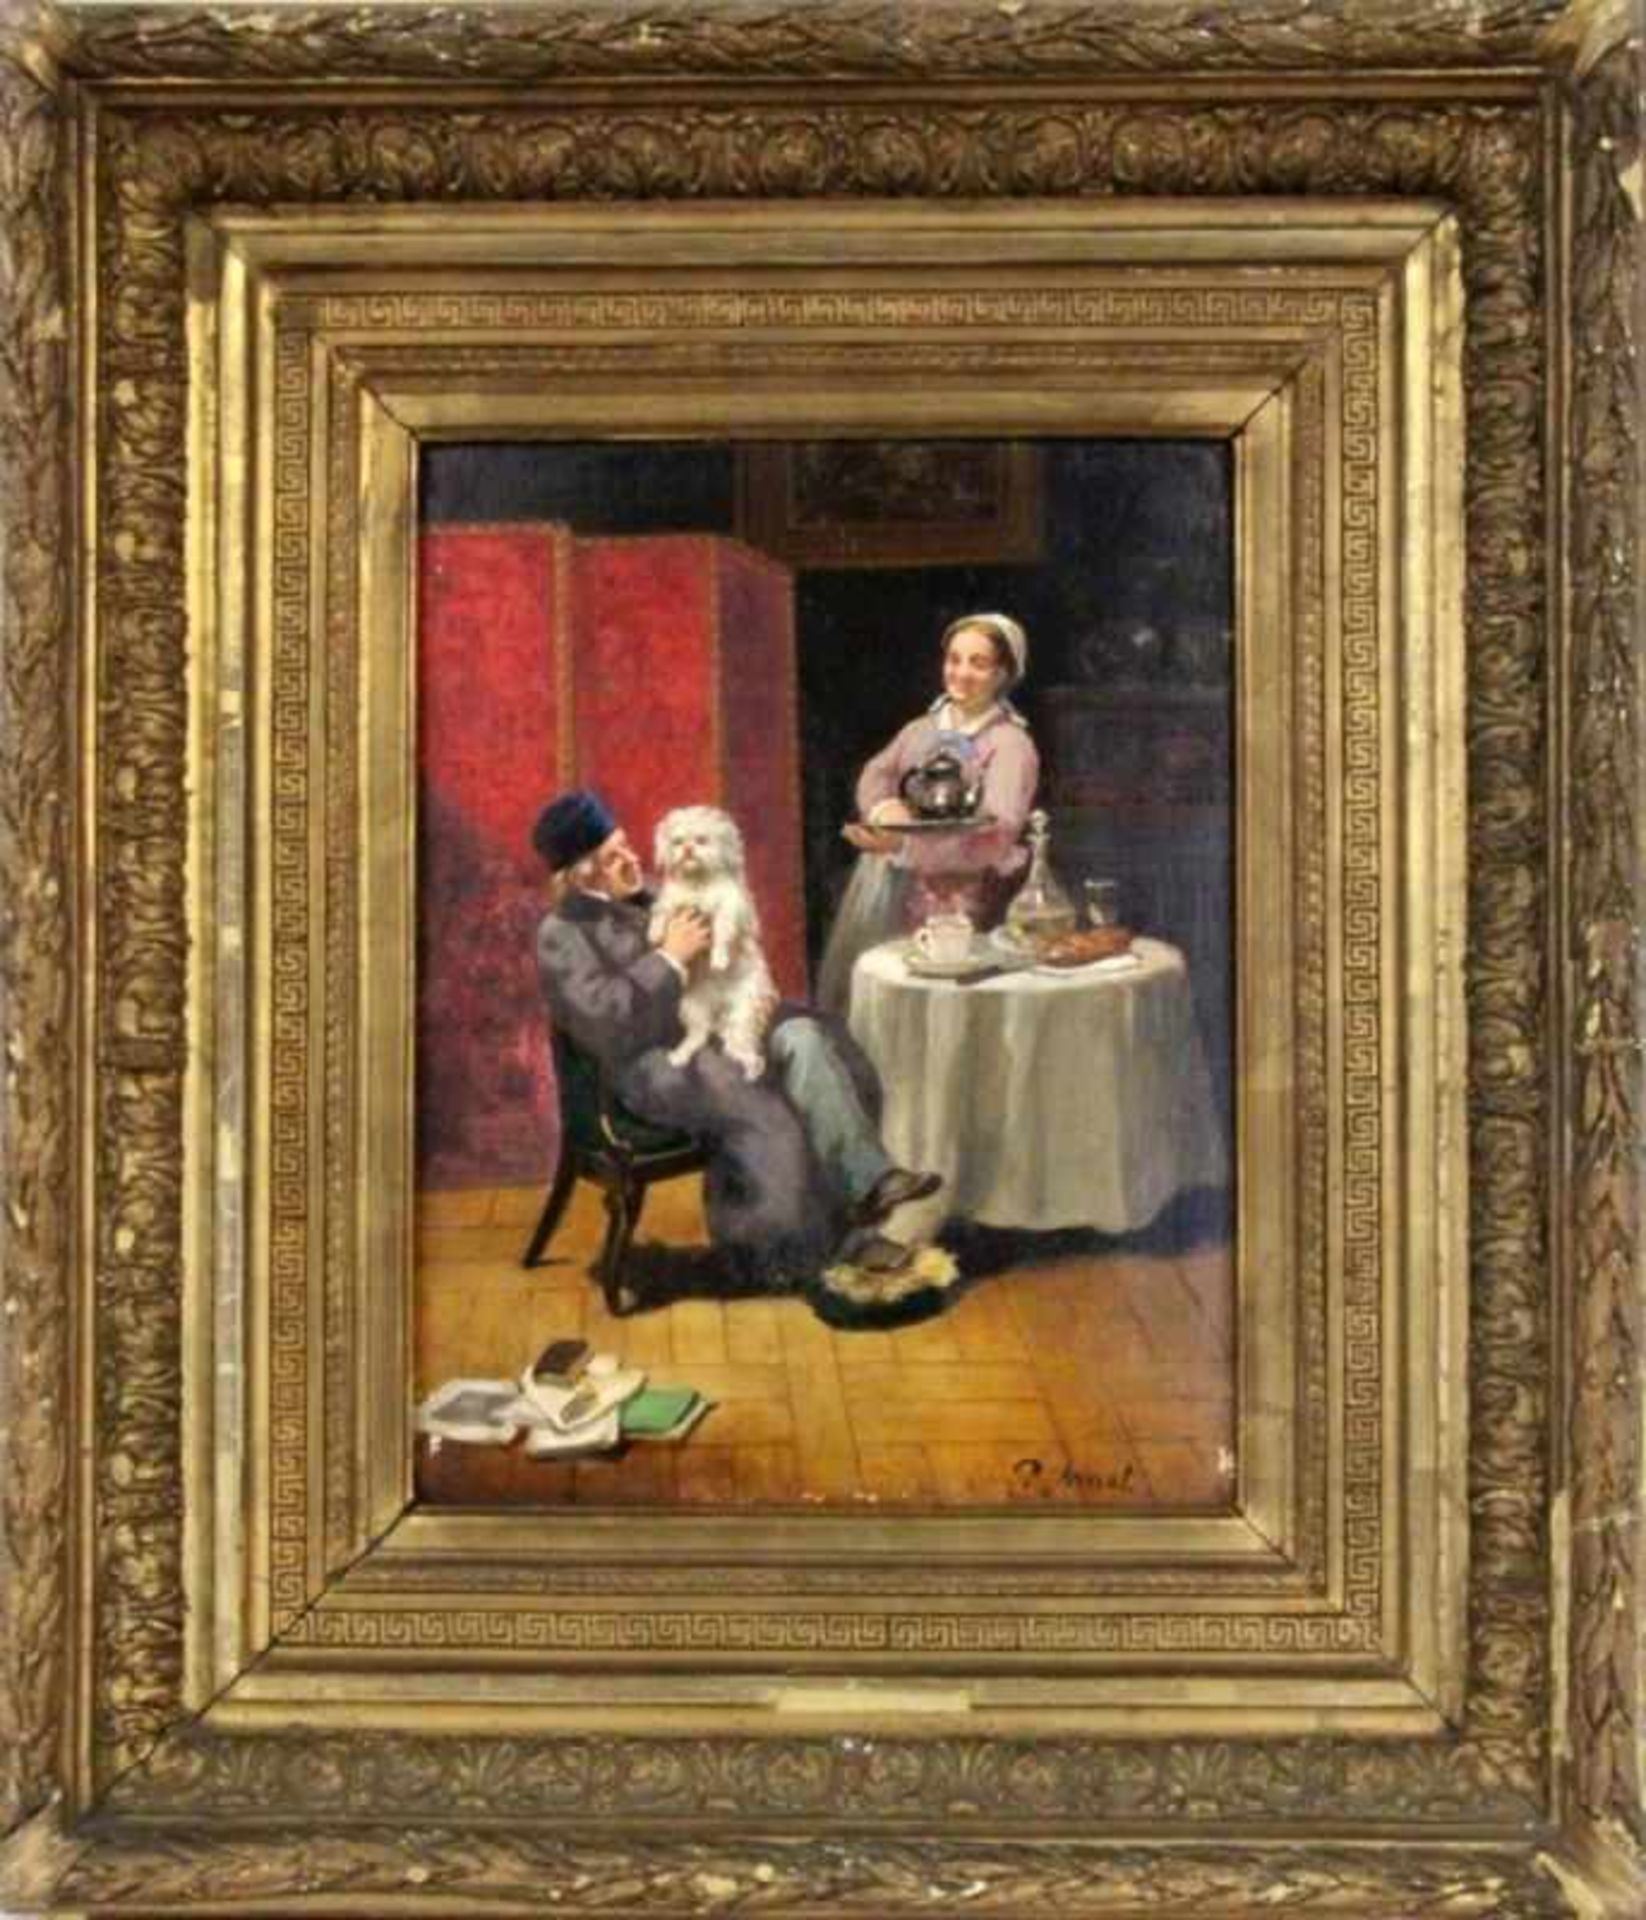 ARNAL, P. circa 1900 Couple with dog at the laid table. Oil on panel, signed. 34.5 x 26.5 - Bild 2 aus 2